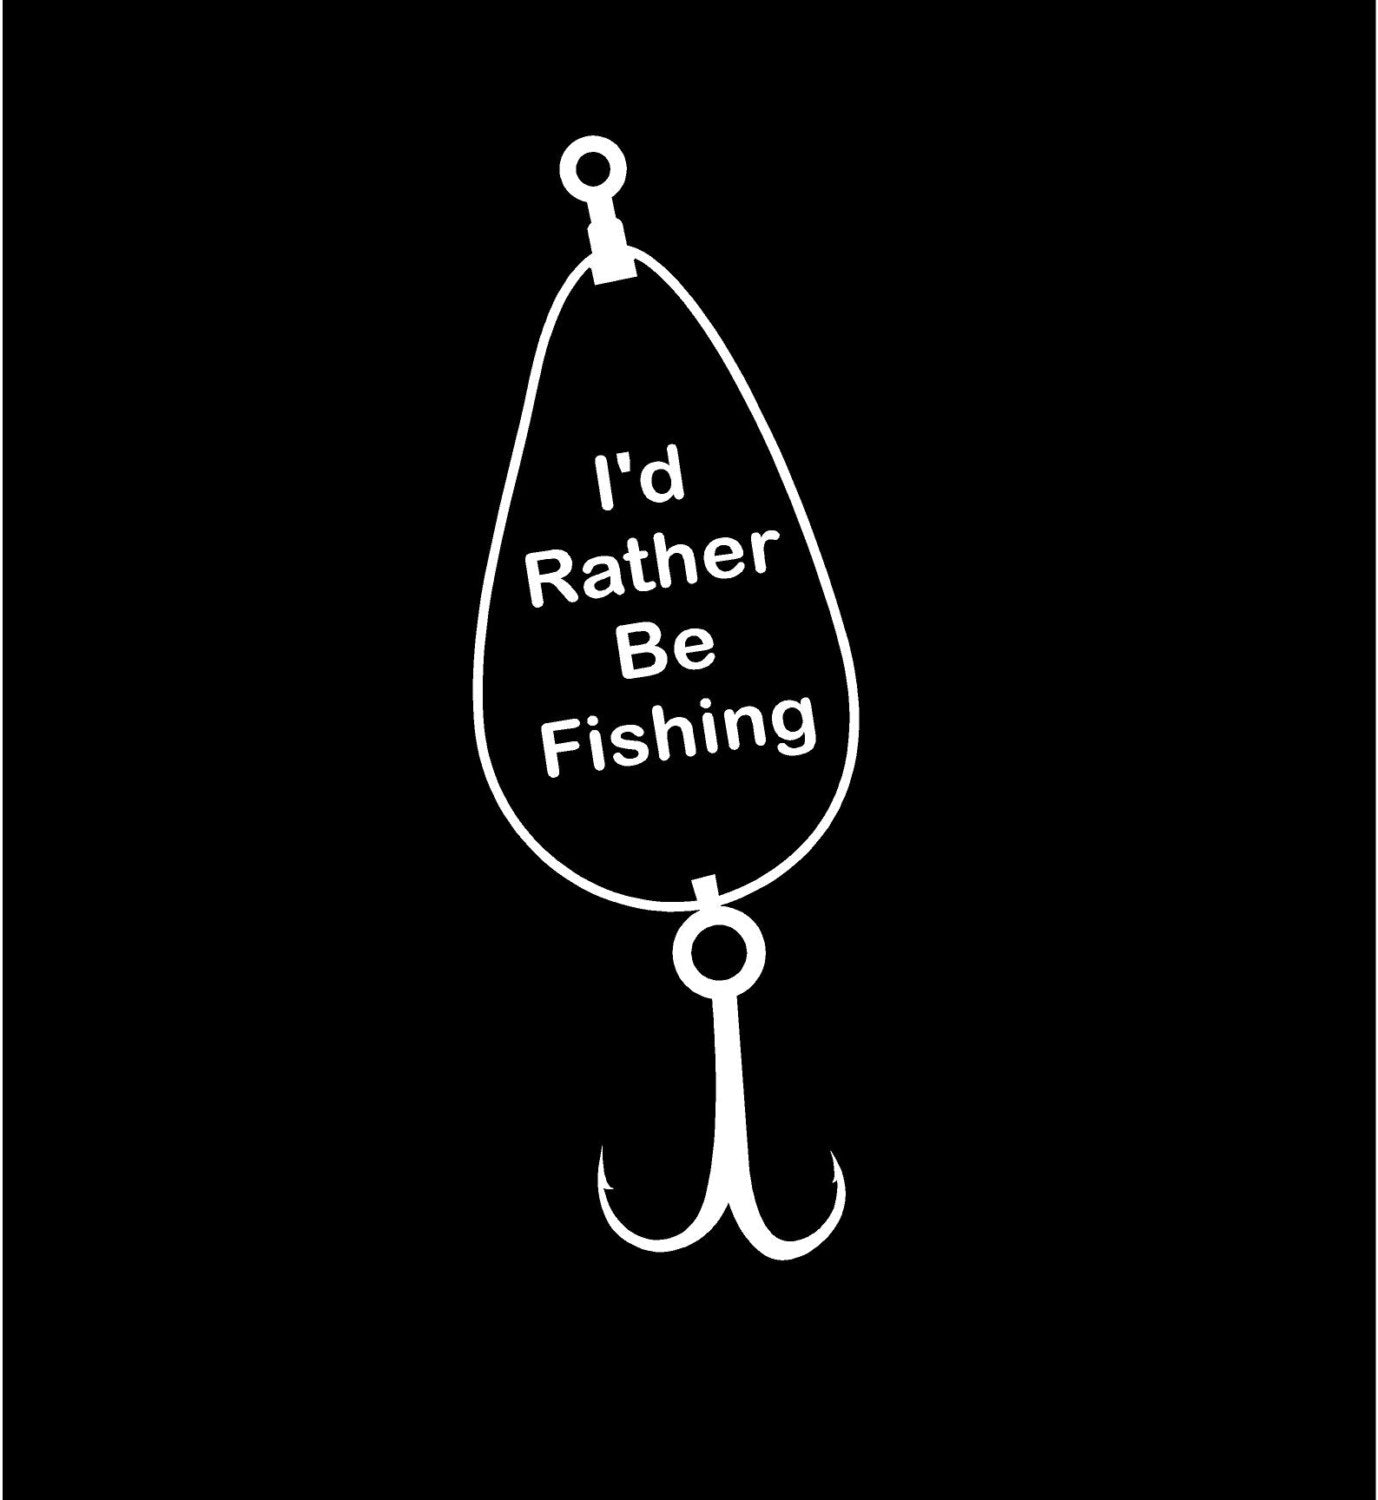 Fishing Lure I'd Rather Be Fishing decal car decal vinyl decal Car